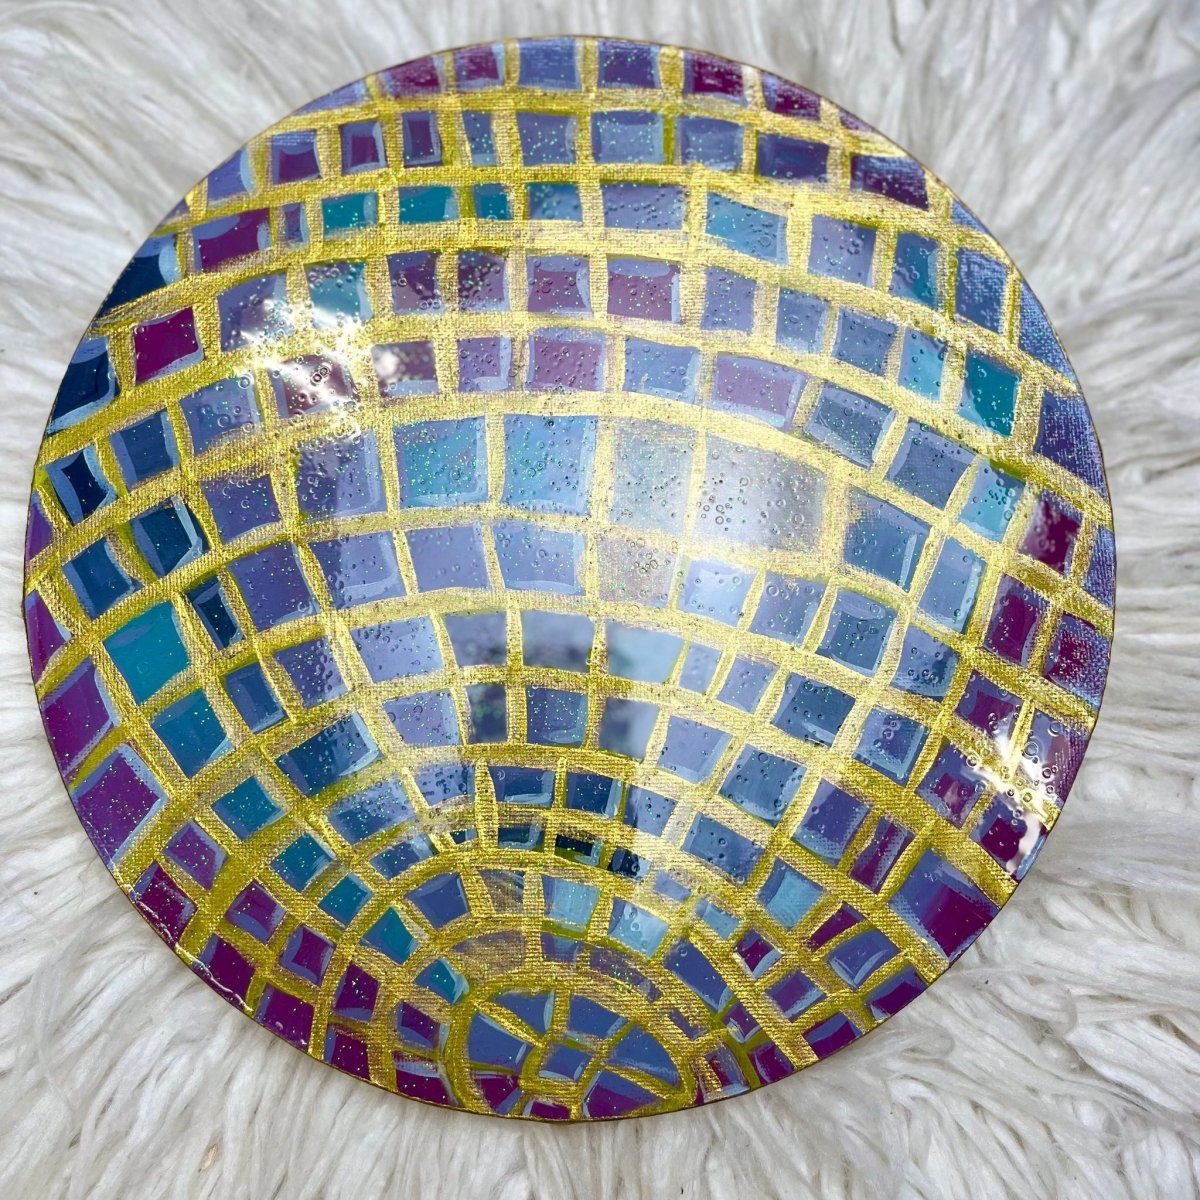 10" Disco Ball Art by Abi - Miles and Bishop